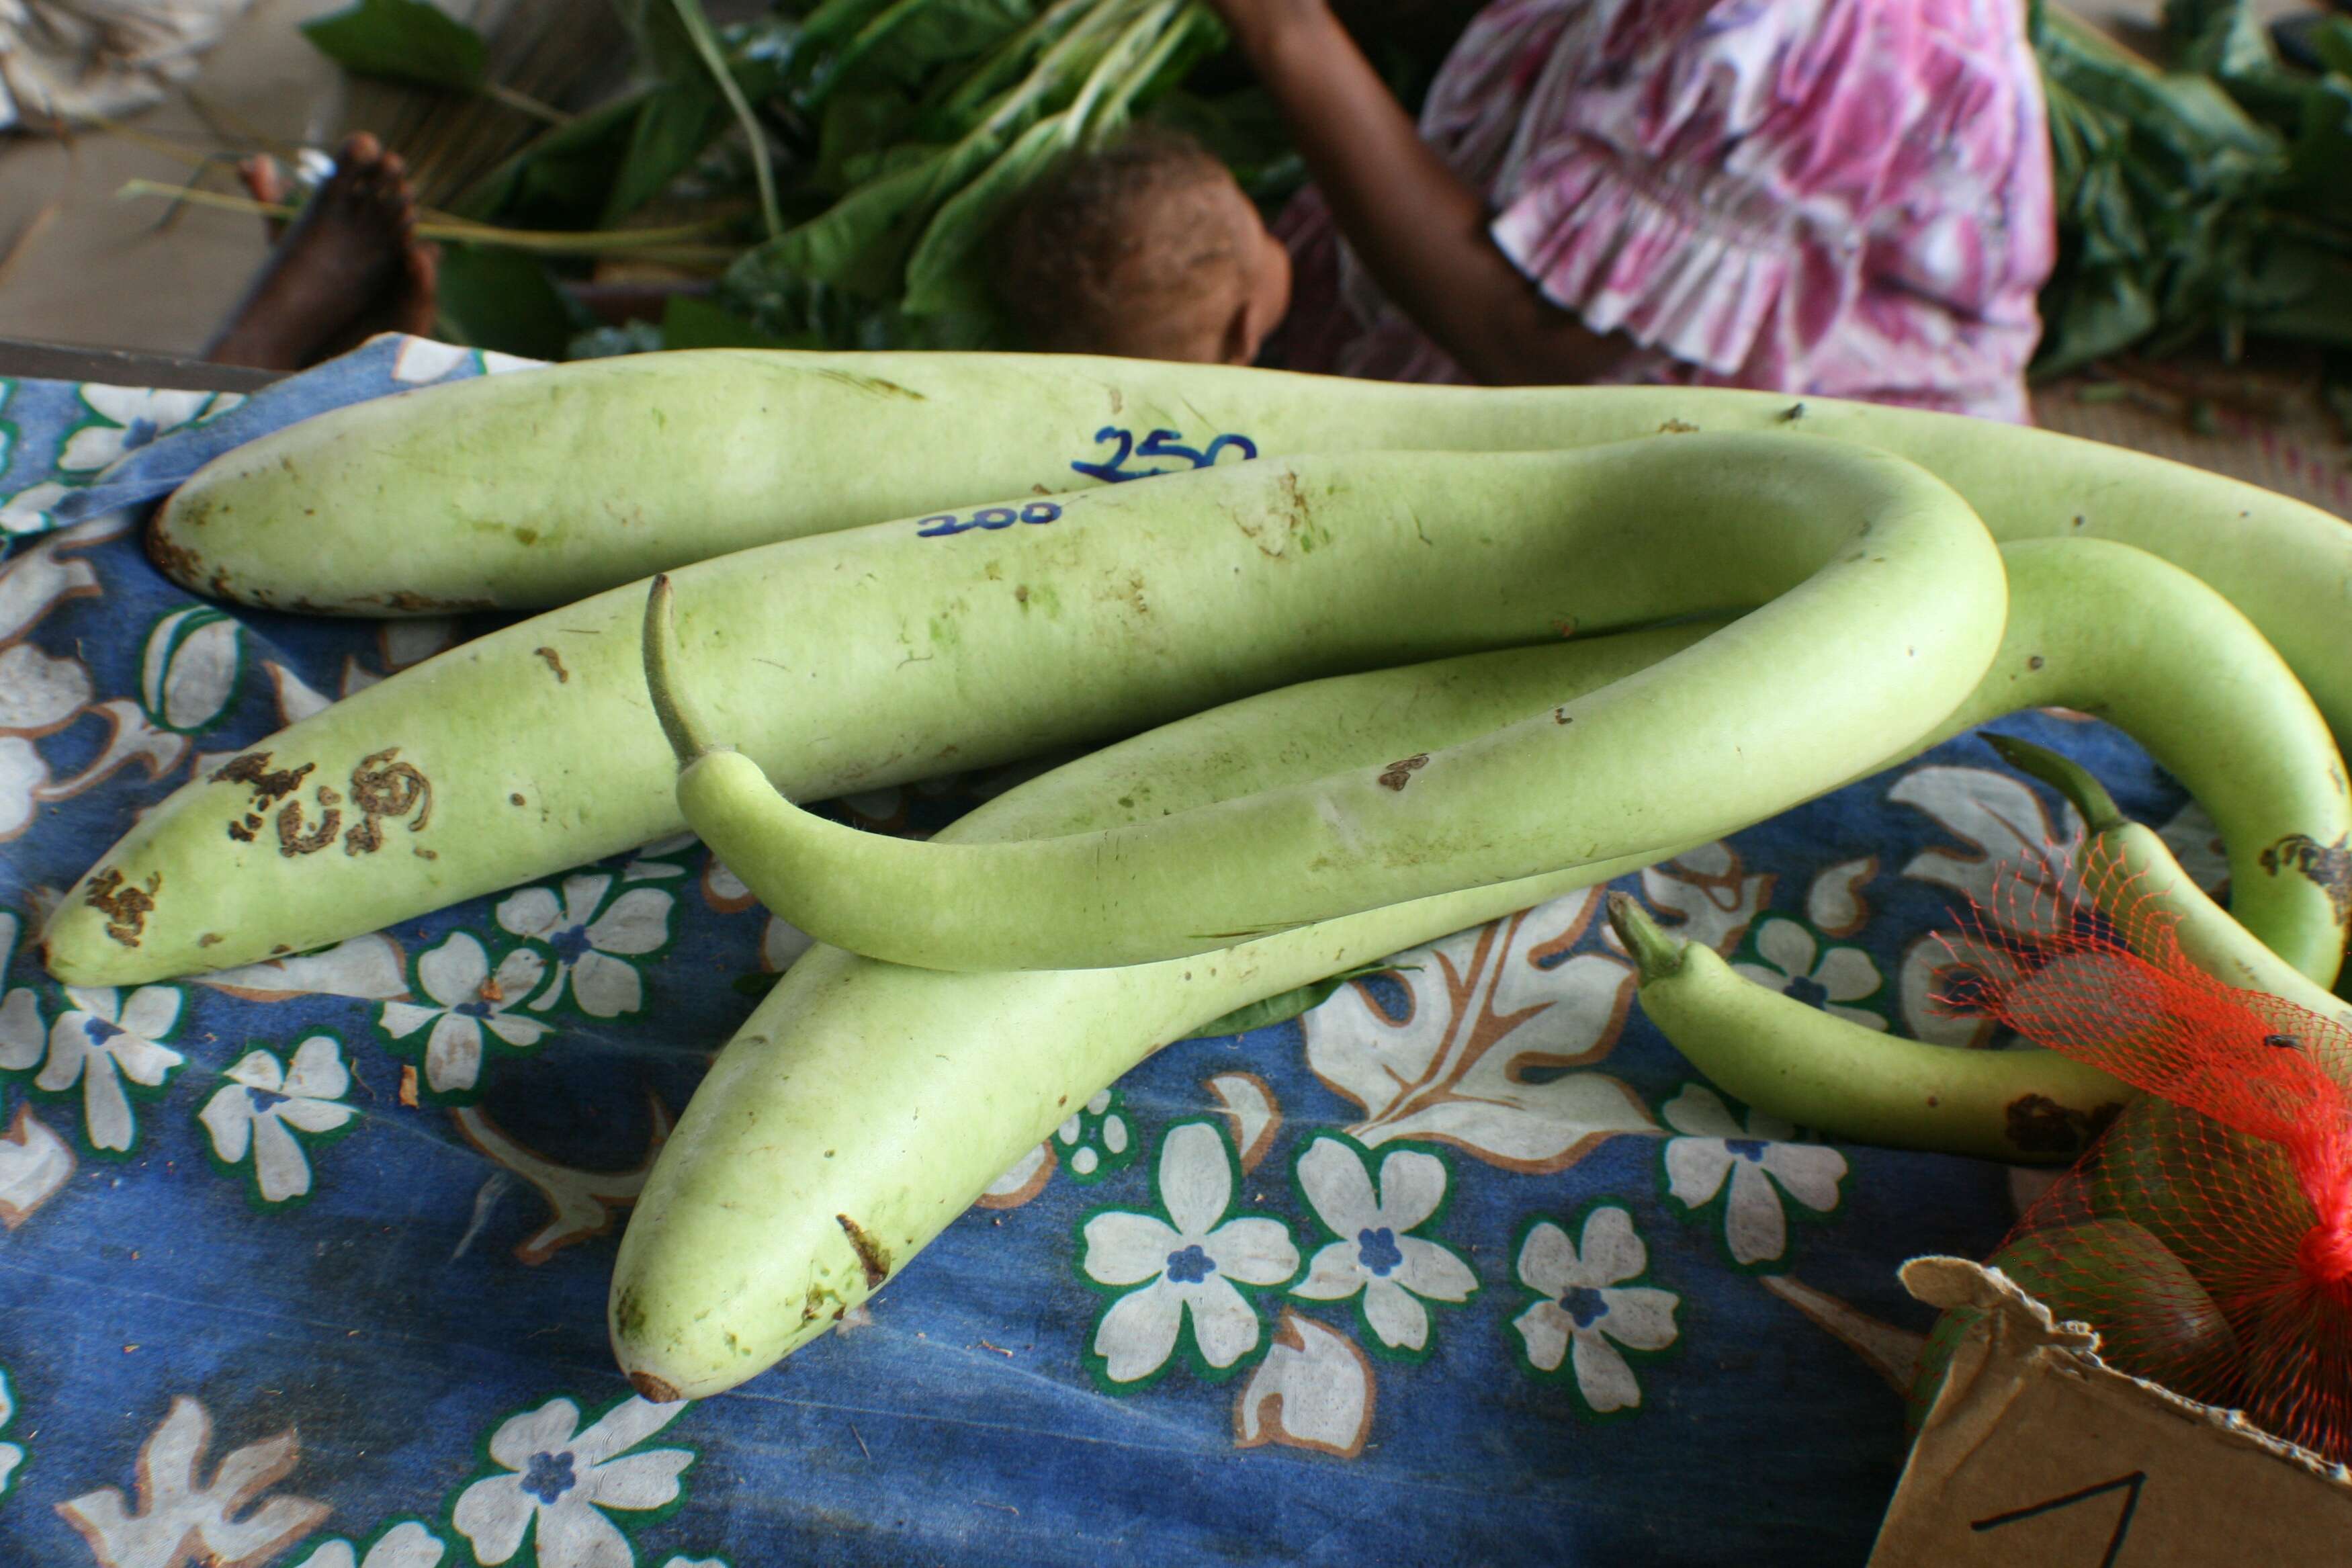 Image of gourd